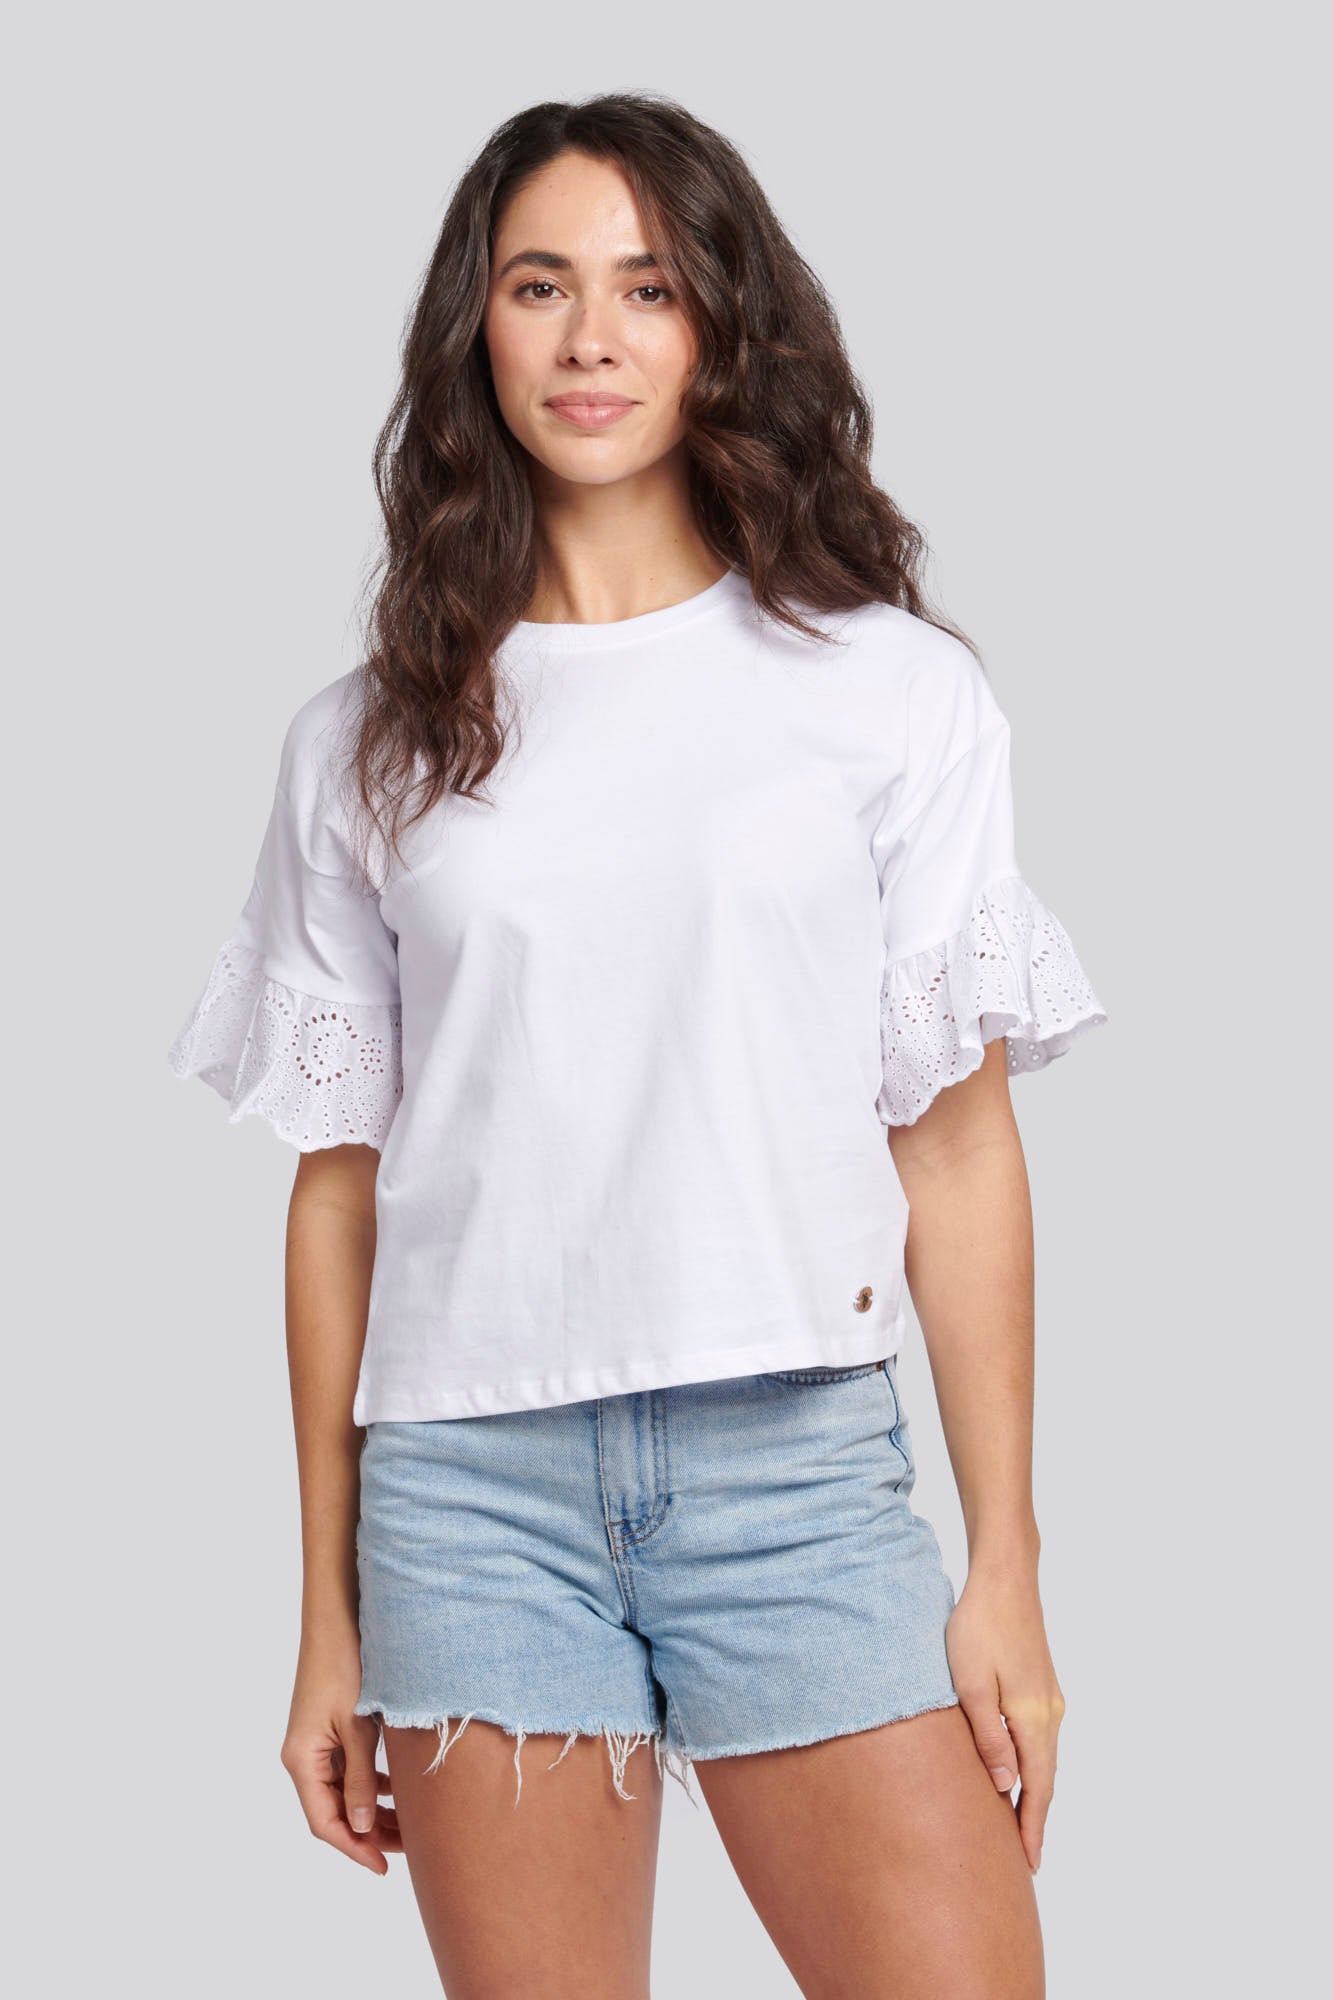 U.S. Polo Assn. Womens Broderie Anglaise T-Shirt in Bright White